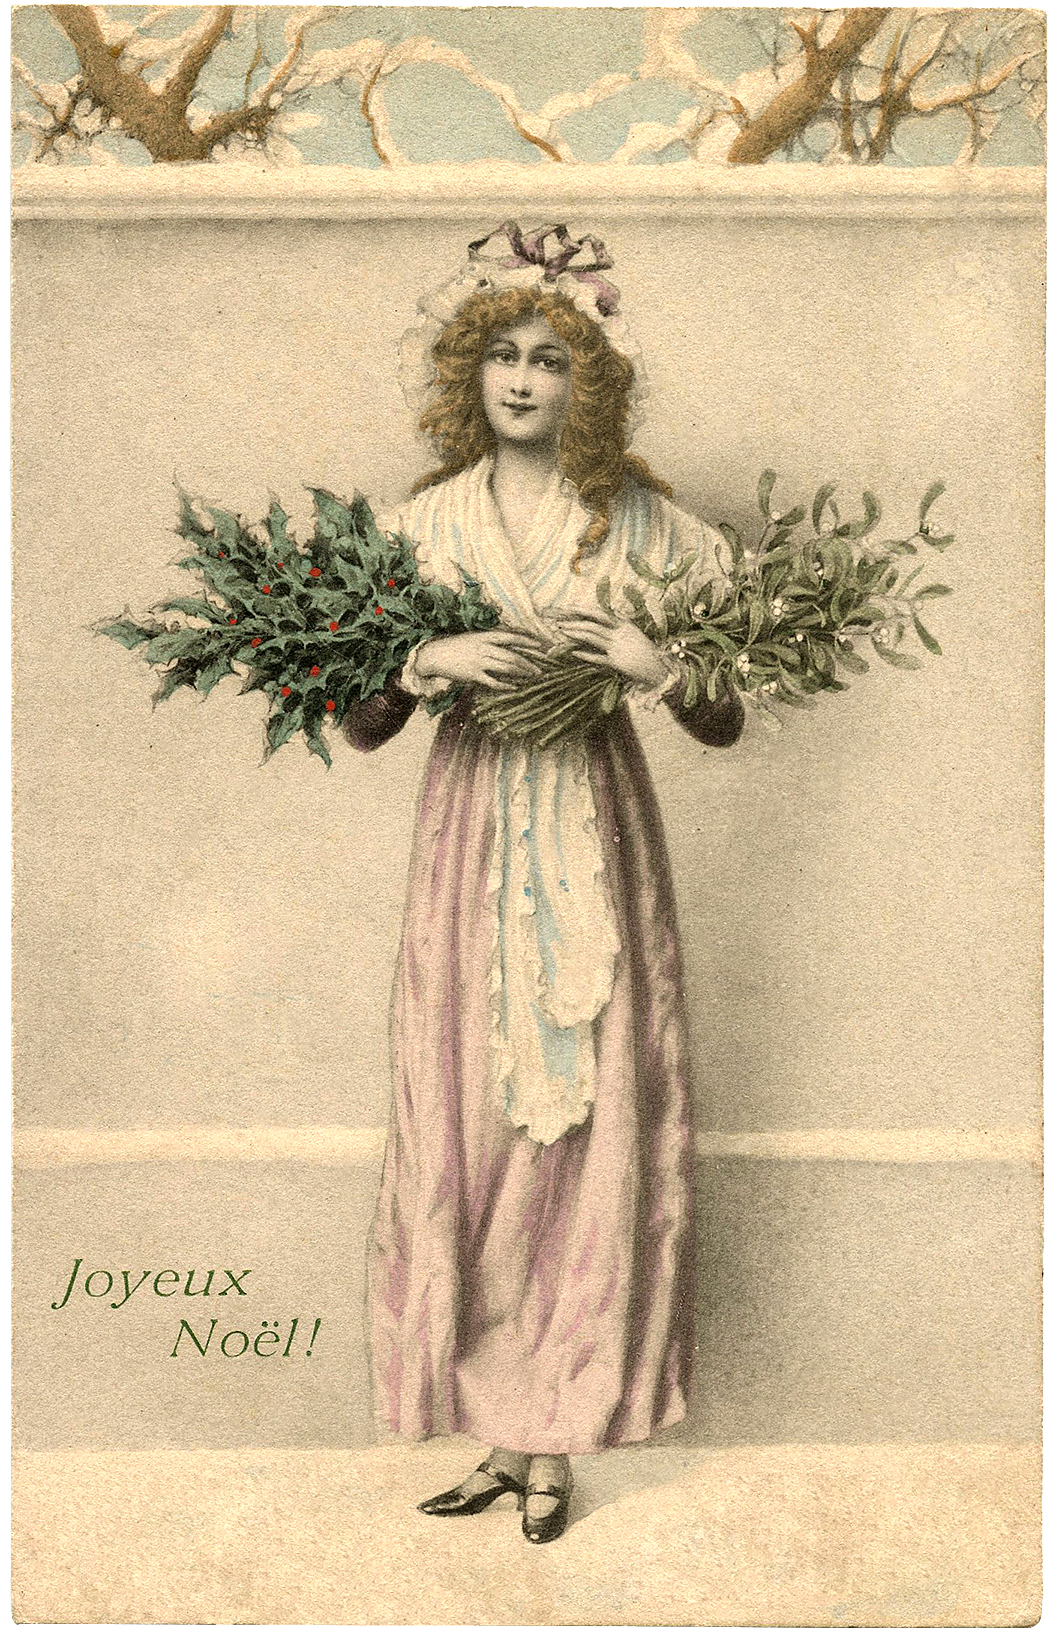 Lady with Holly and Mistletoe Image - The Graphics Fairy